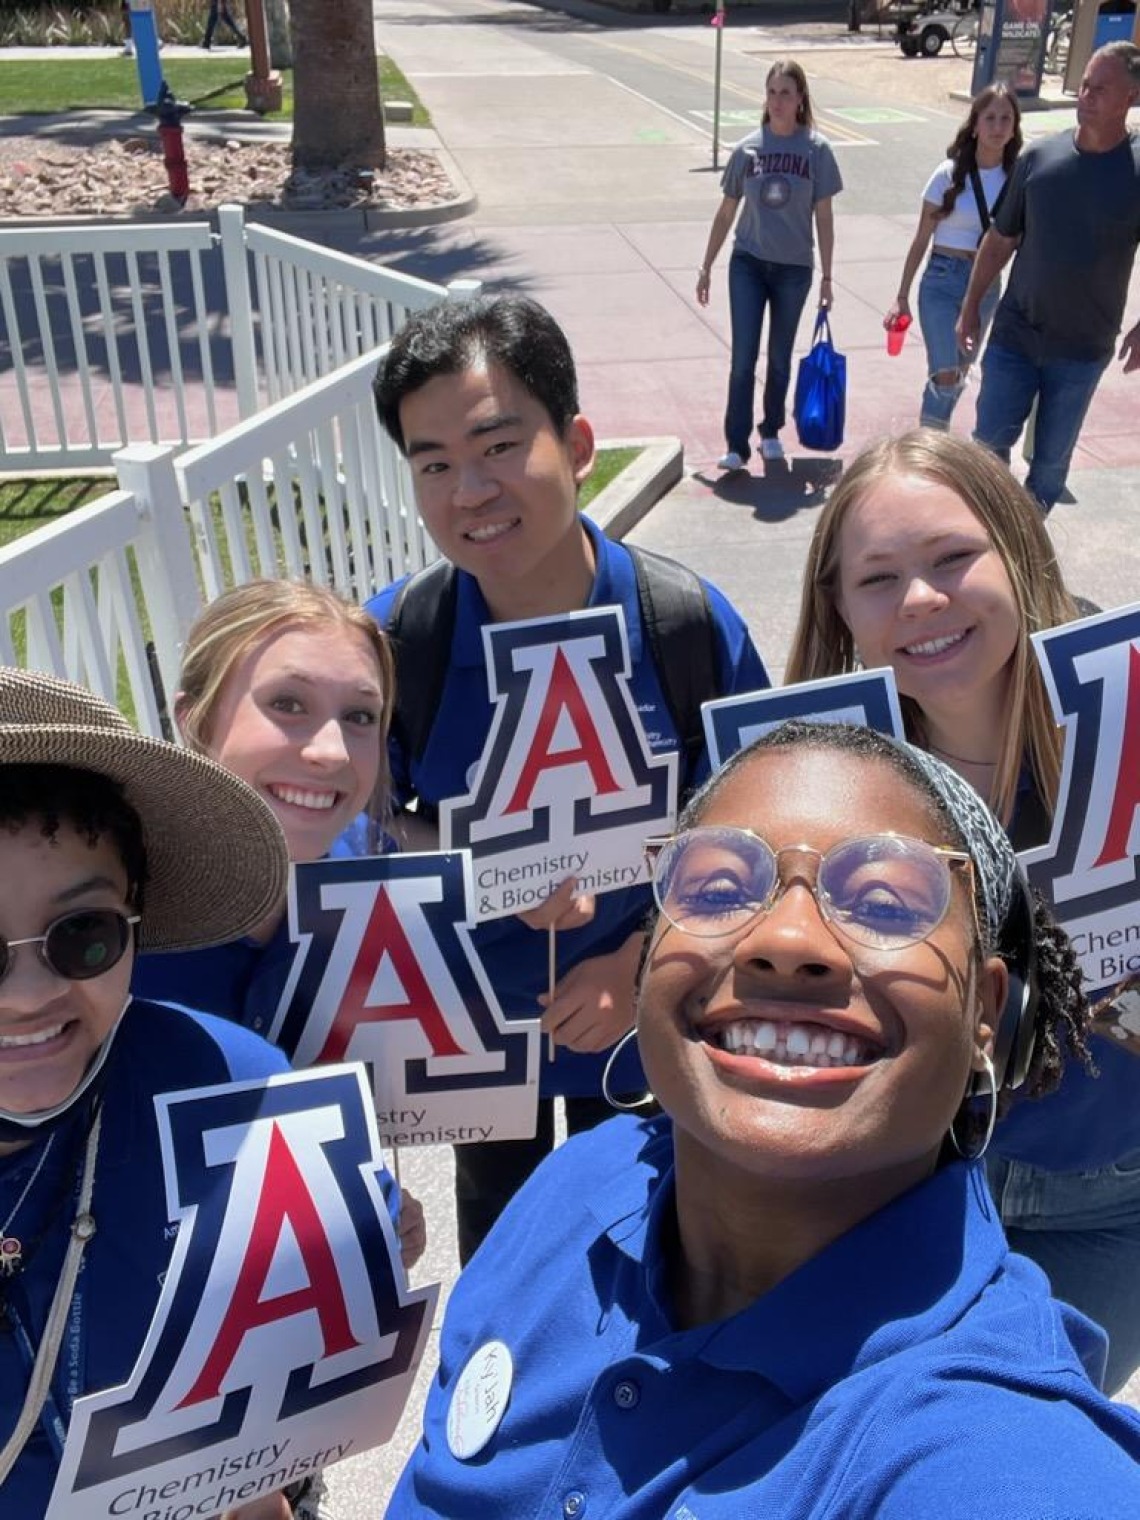 5 CBC students smile for a selfie and hold the UArizona "A"